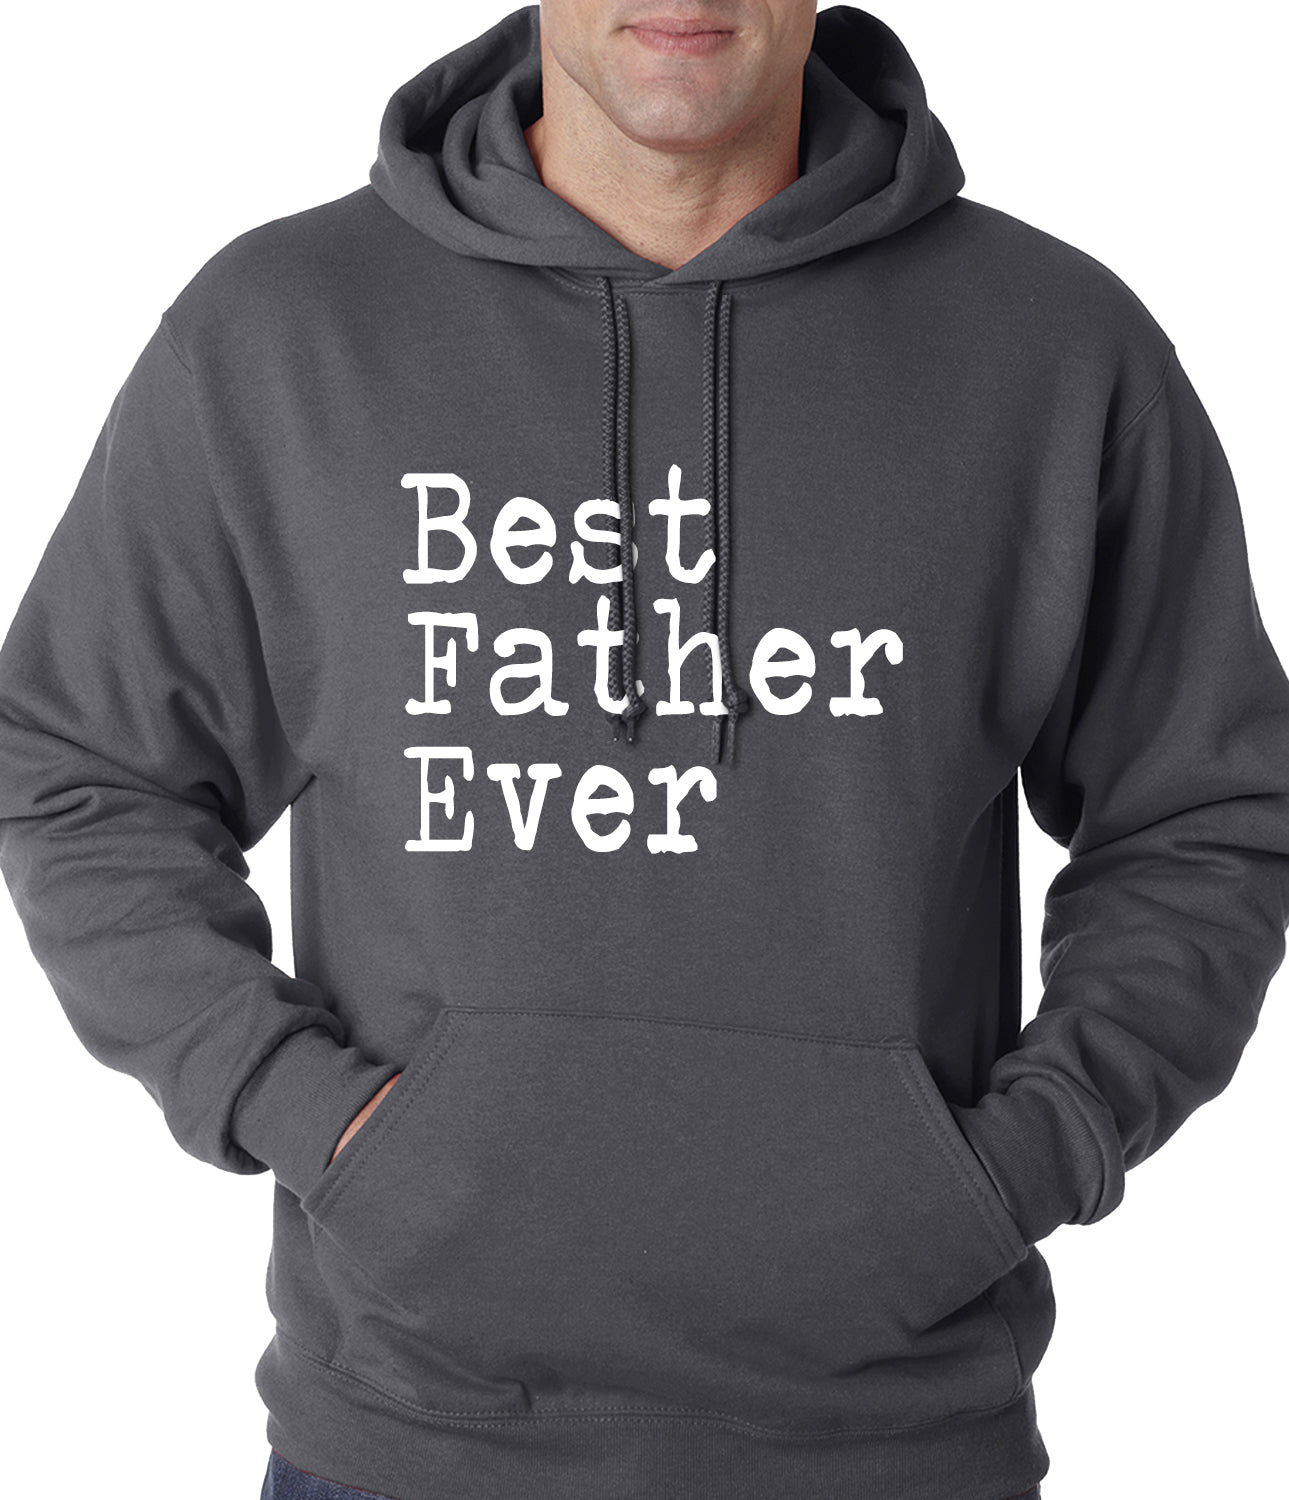 Best Father Ever Adult Hoodie